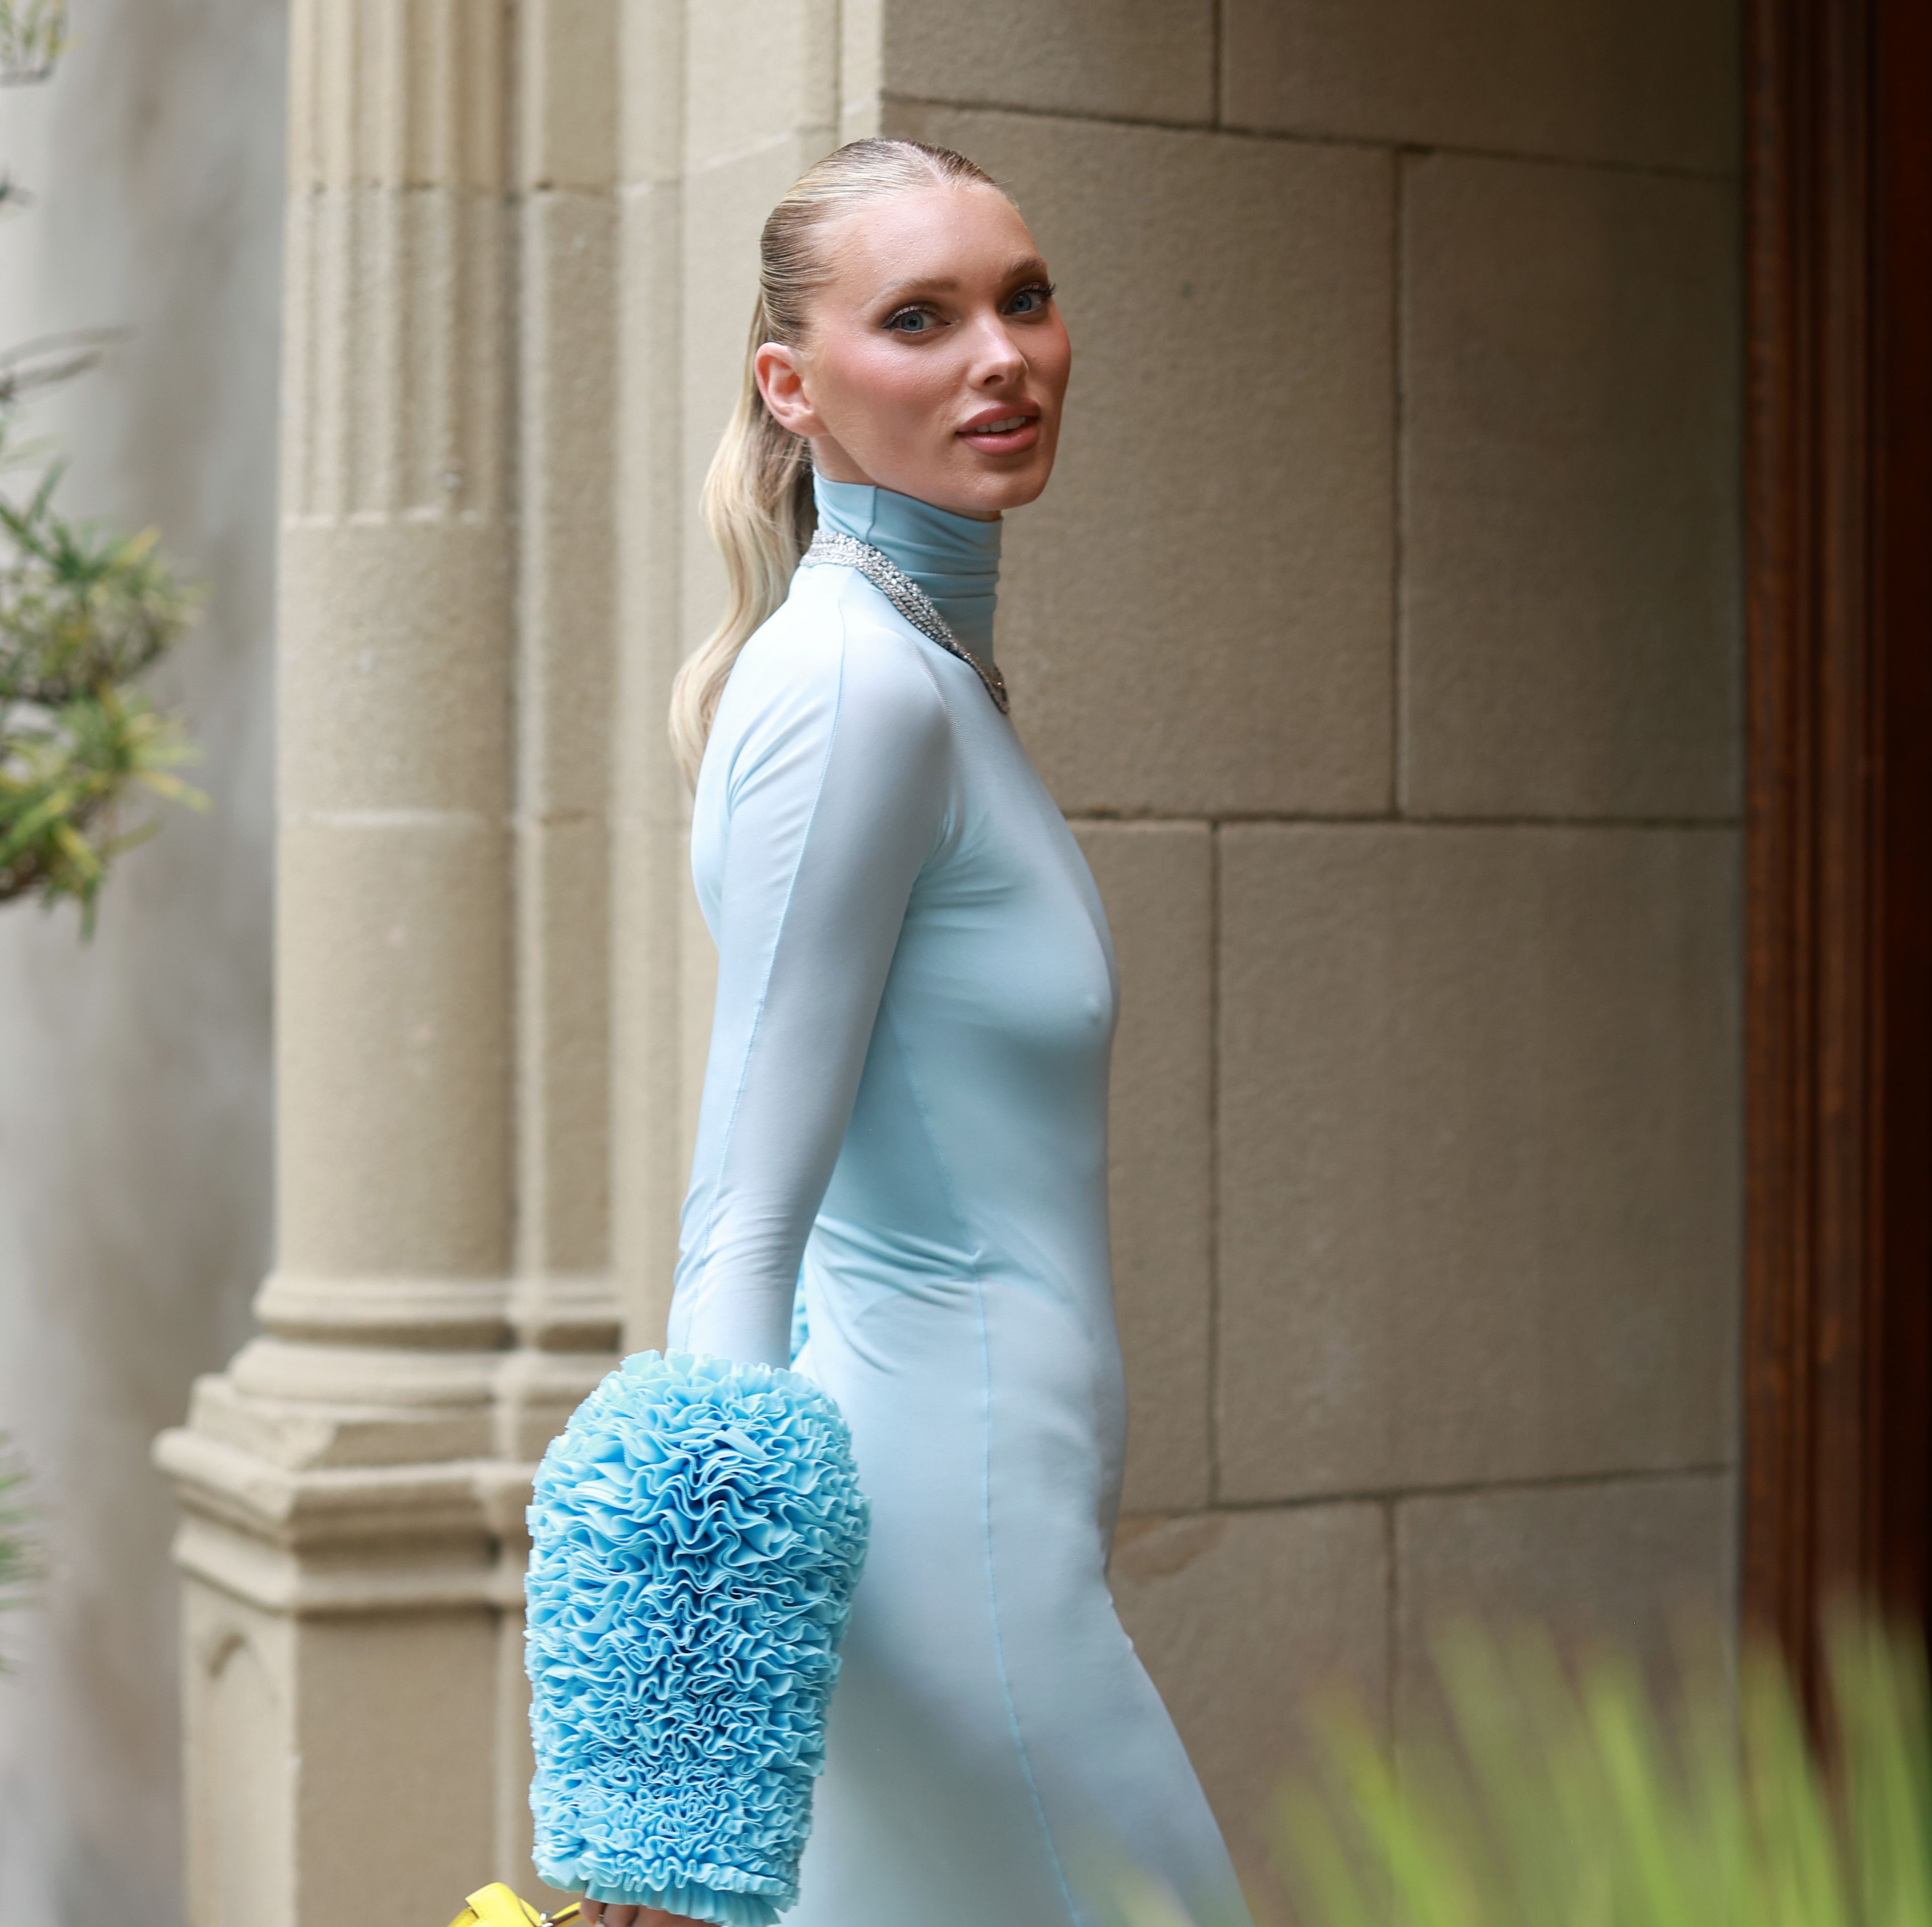 Elsa Hosk Understood the Assignment with Her Head-to-Toe Tiffany Blue Look